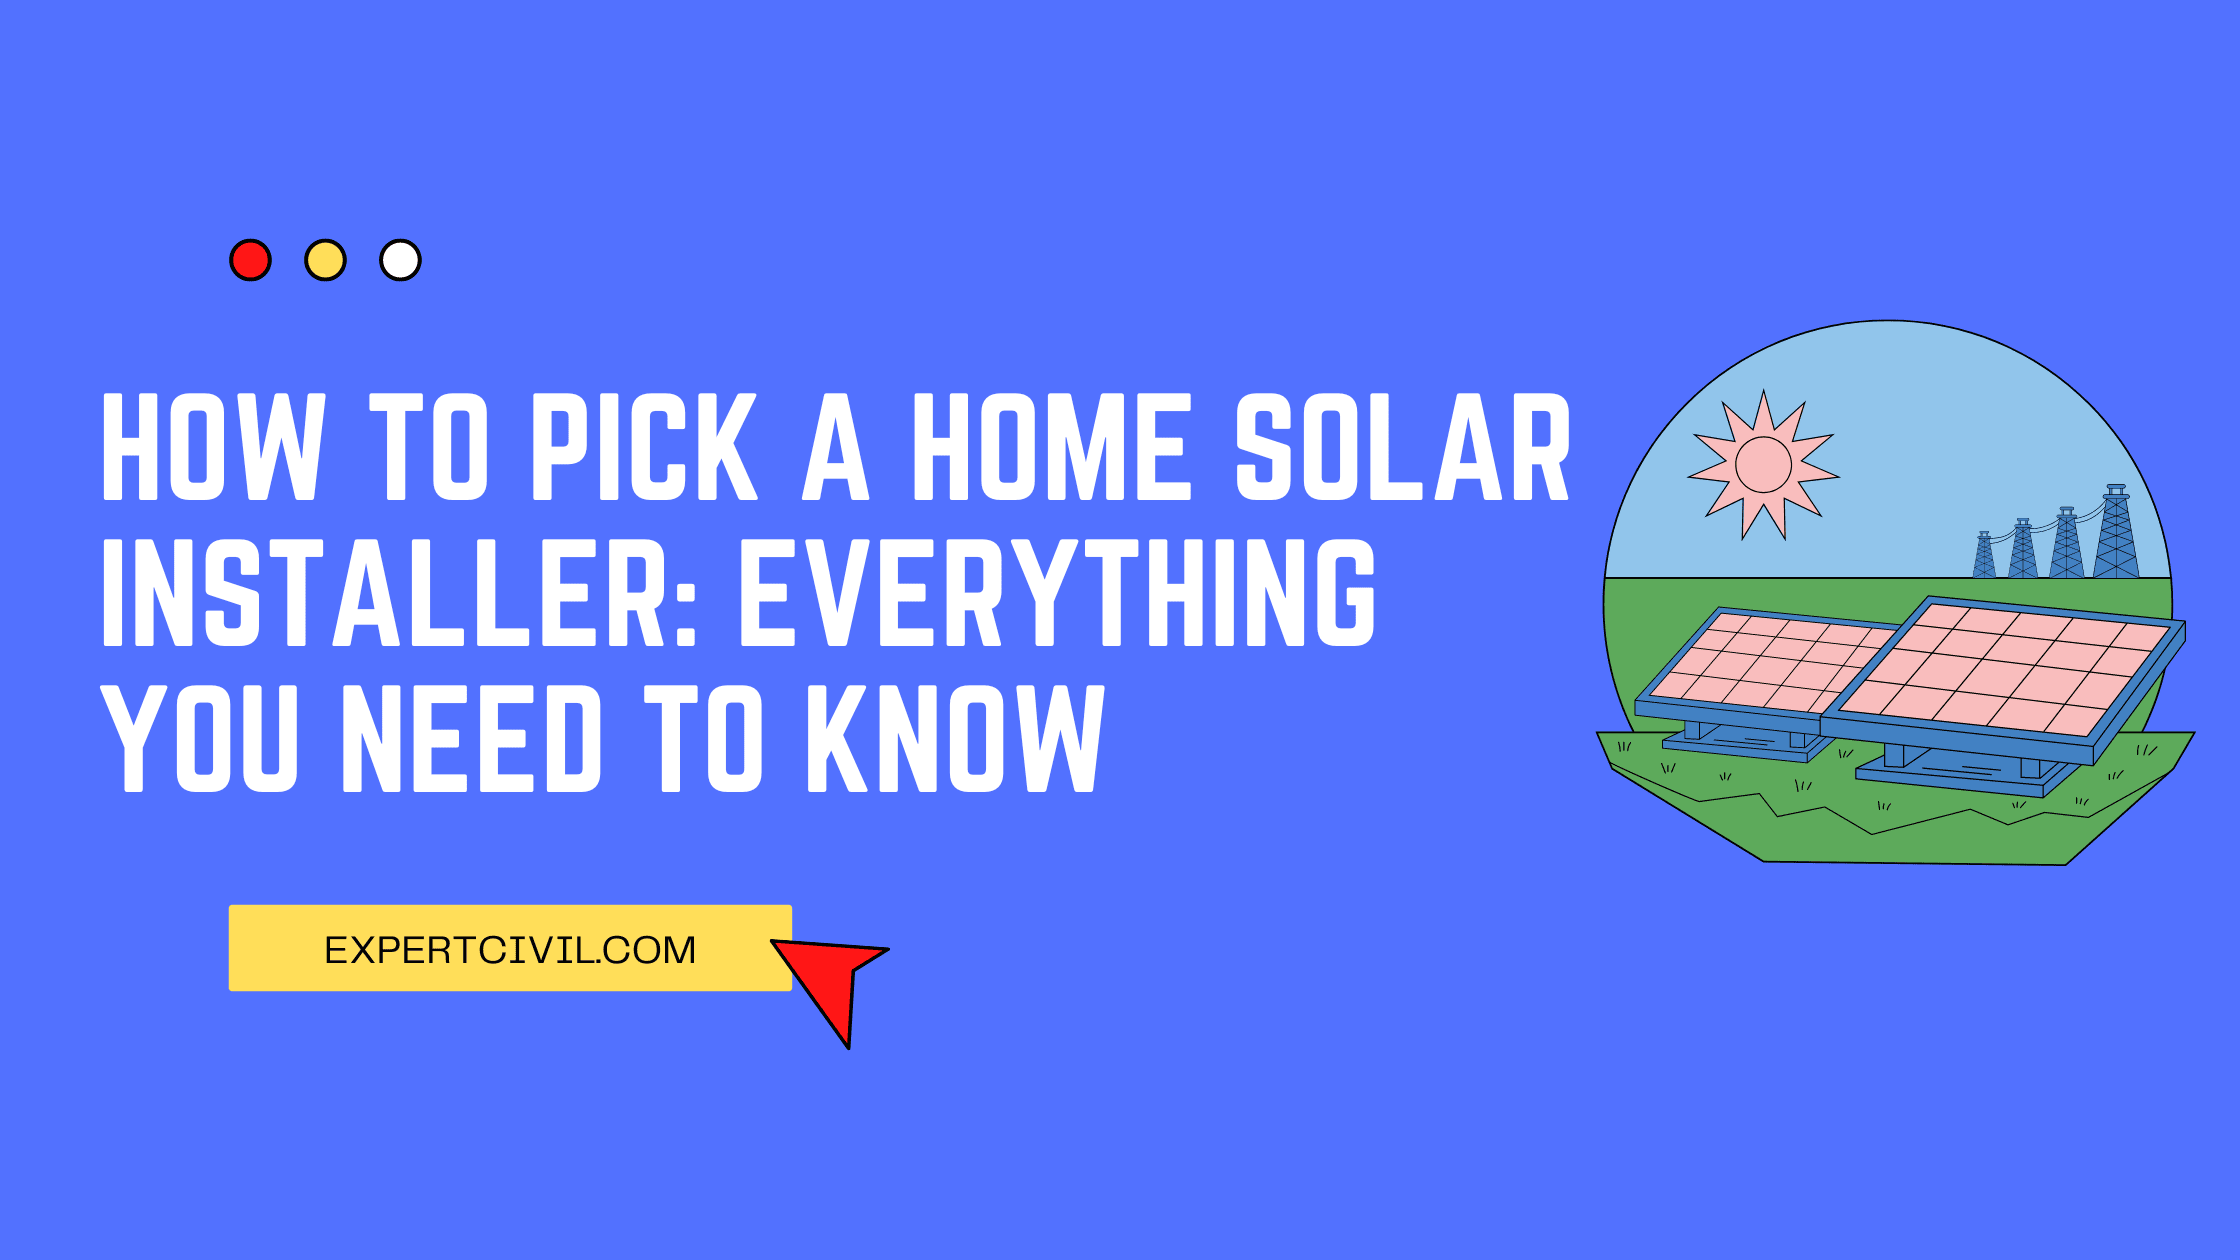 How to Pick a Home Solar Installer: Everything You Need to Know